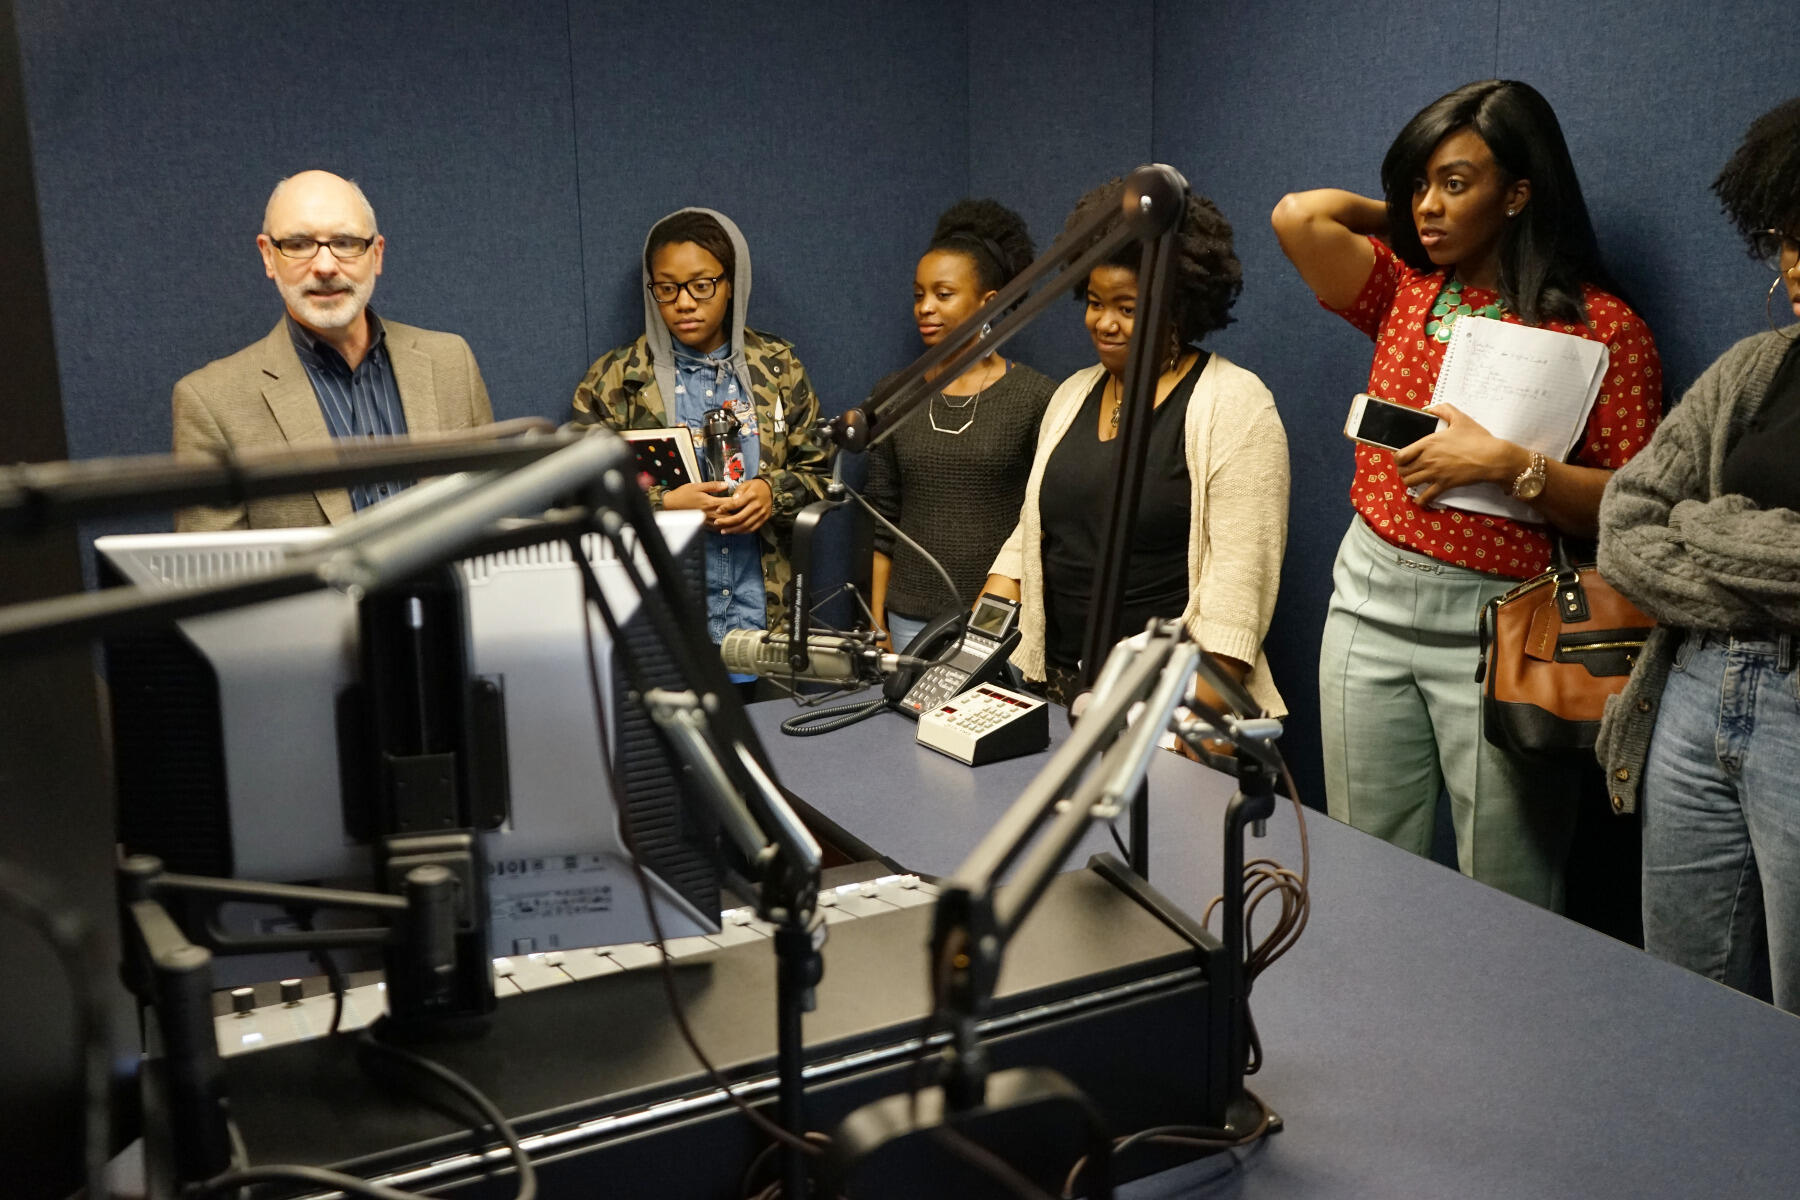 Bill Miller, vice president and general manager of  88.9 WCVE Public Radio, shows the "Podcasting While Black" students the NPR member station's studio during a recent field trip.
